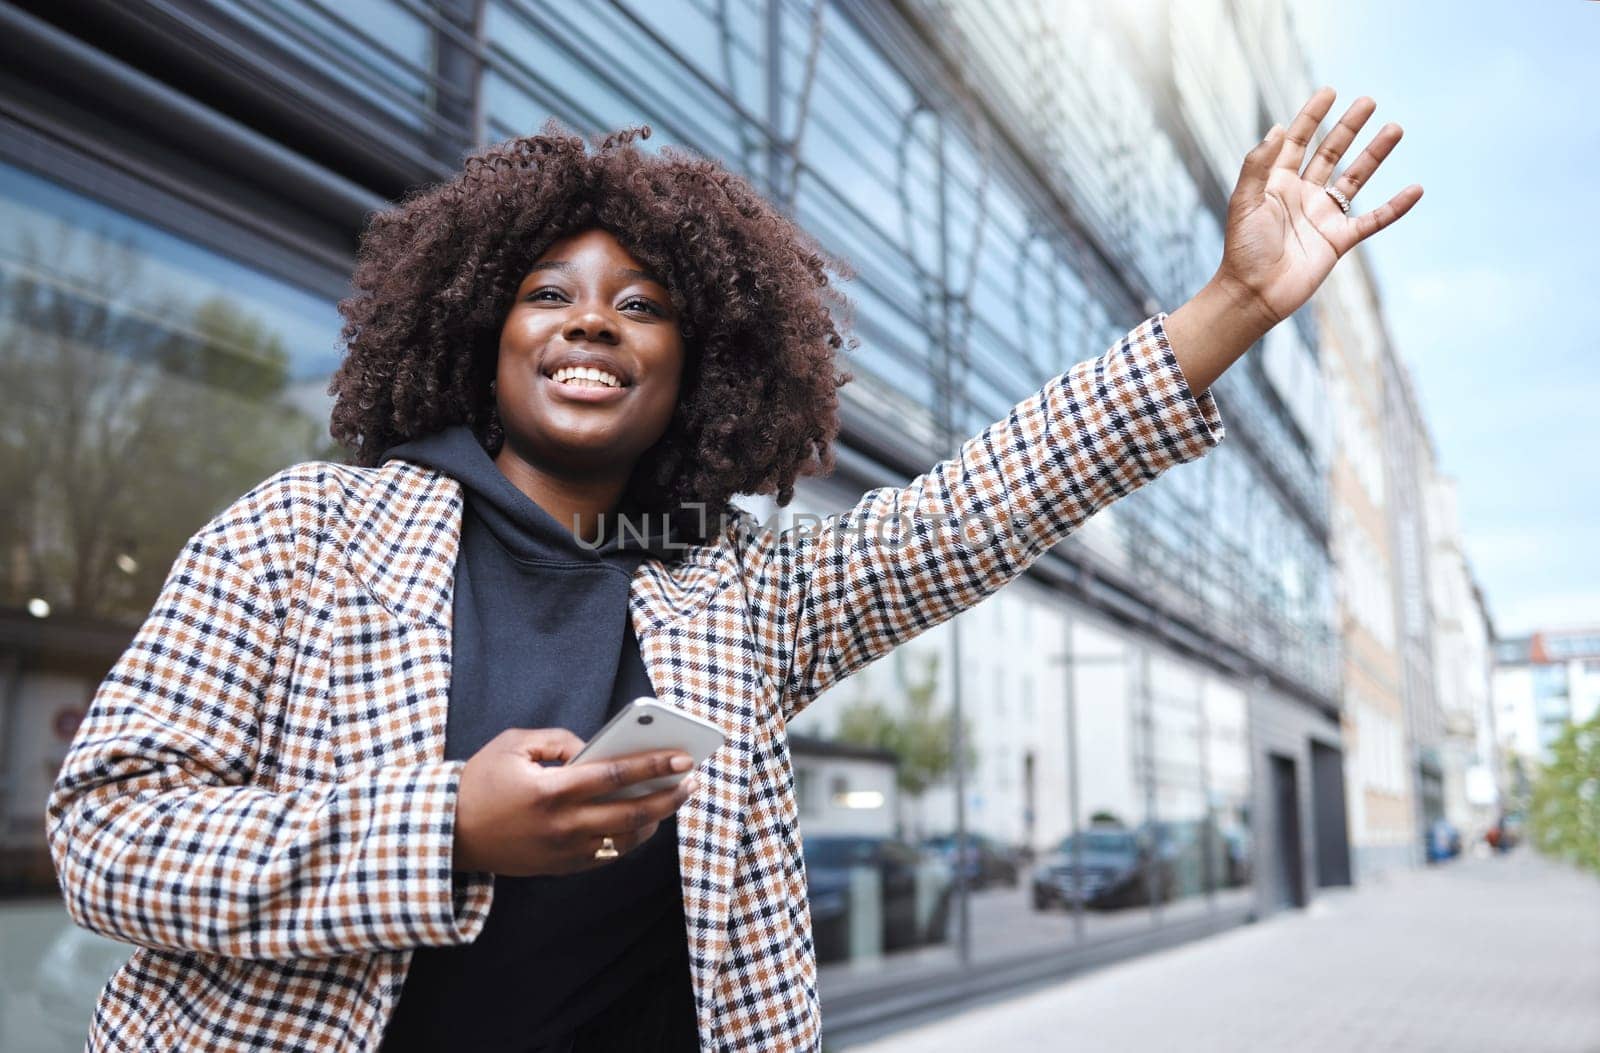 Taxi, hands and sign by black woman in city for travel, commute or waiting for transport on building background. Hand, bus and stop by girl in Florida for transportation service, app or drive request.